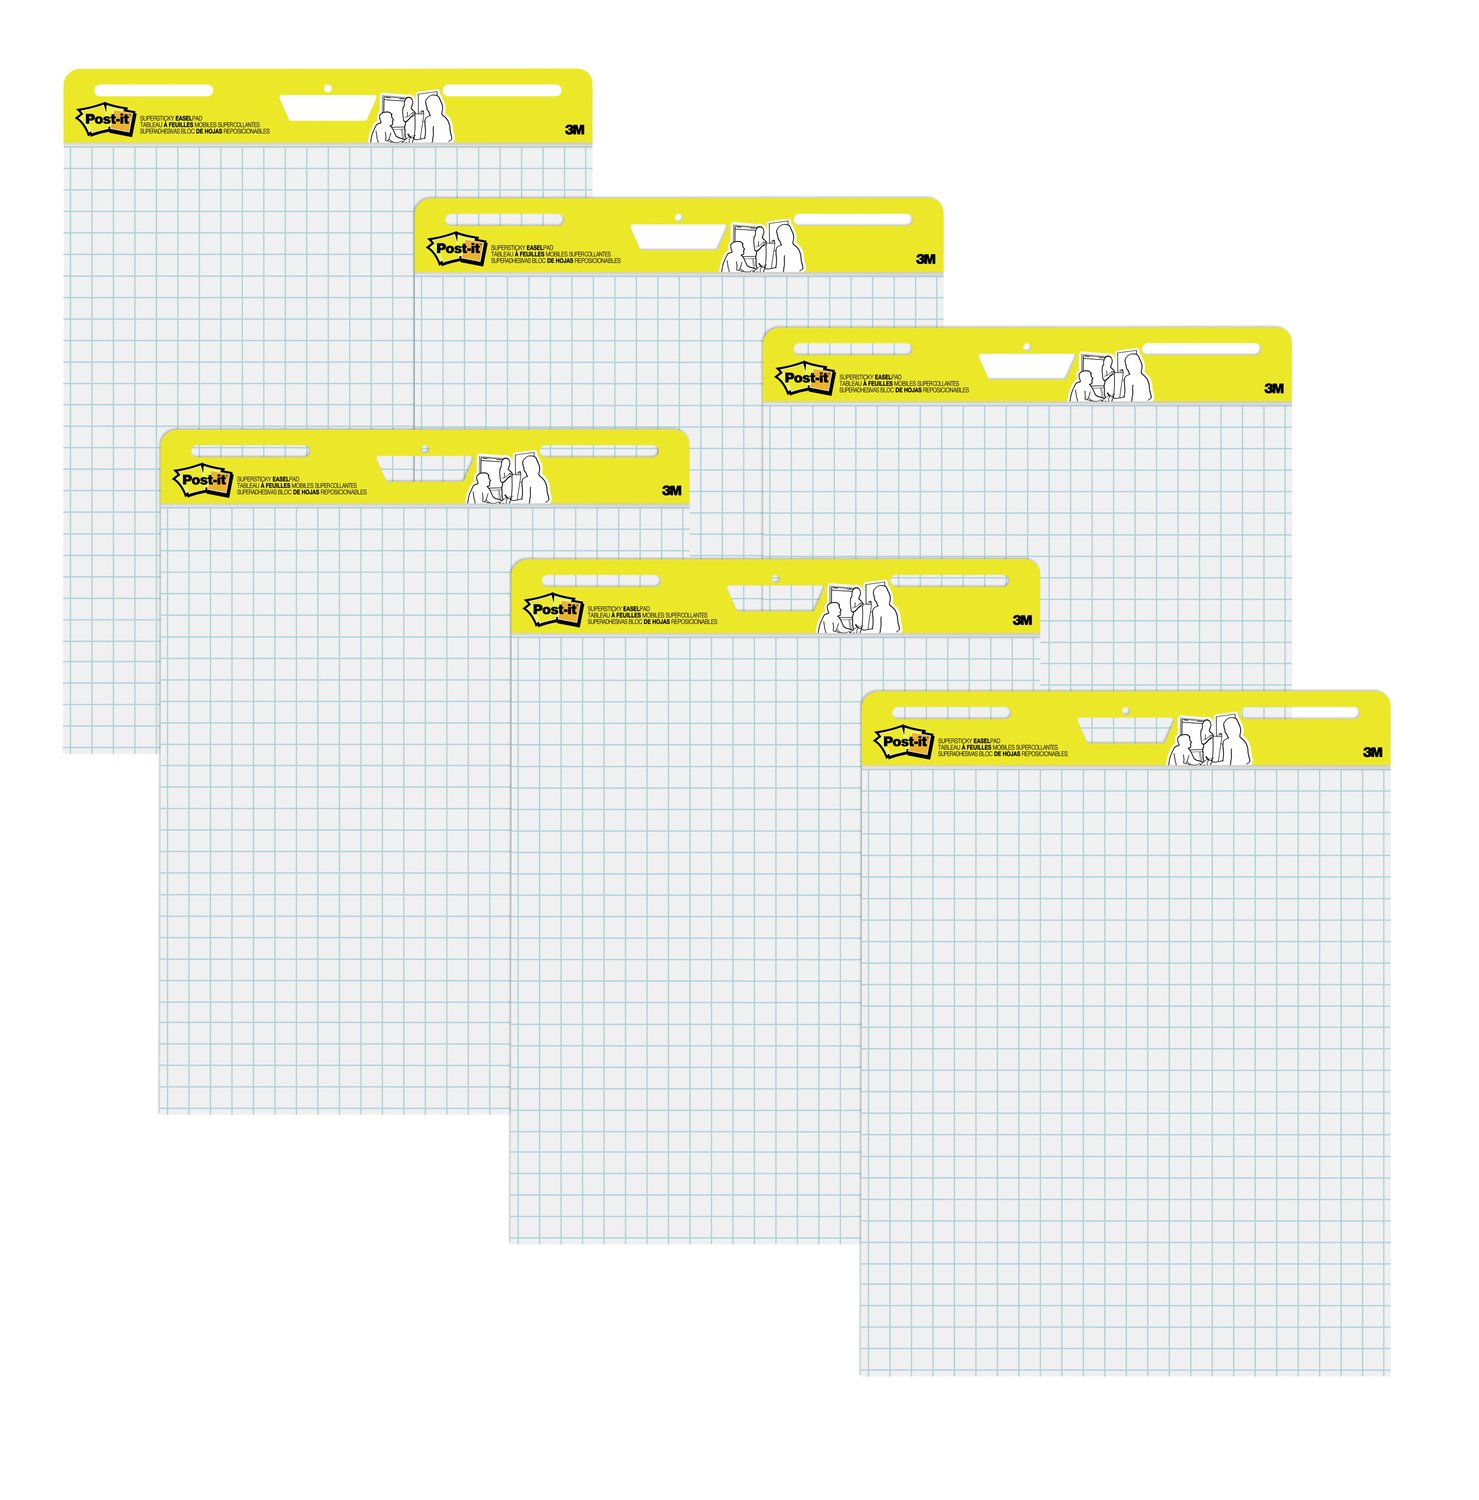 7010337704 - Post-it Super Sticky Easel Pad, 560 VAD 6PK, 25 in x 30 in (63.5 cm x
76.2 cm), 6/pack